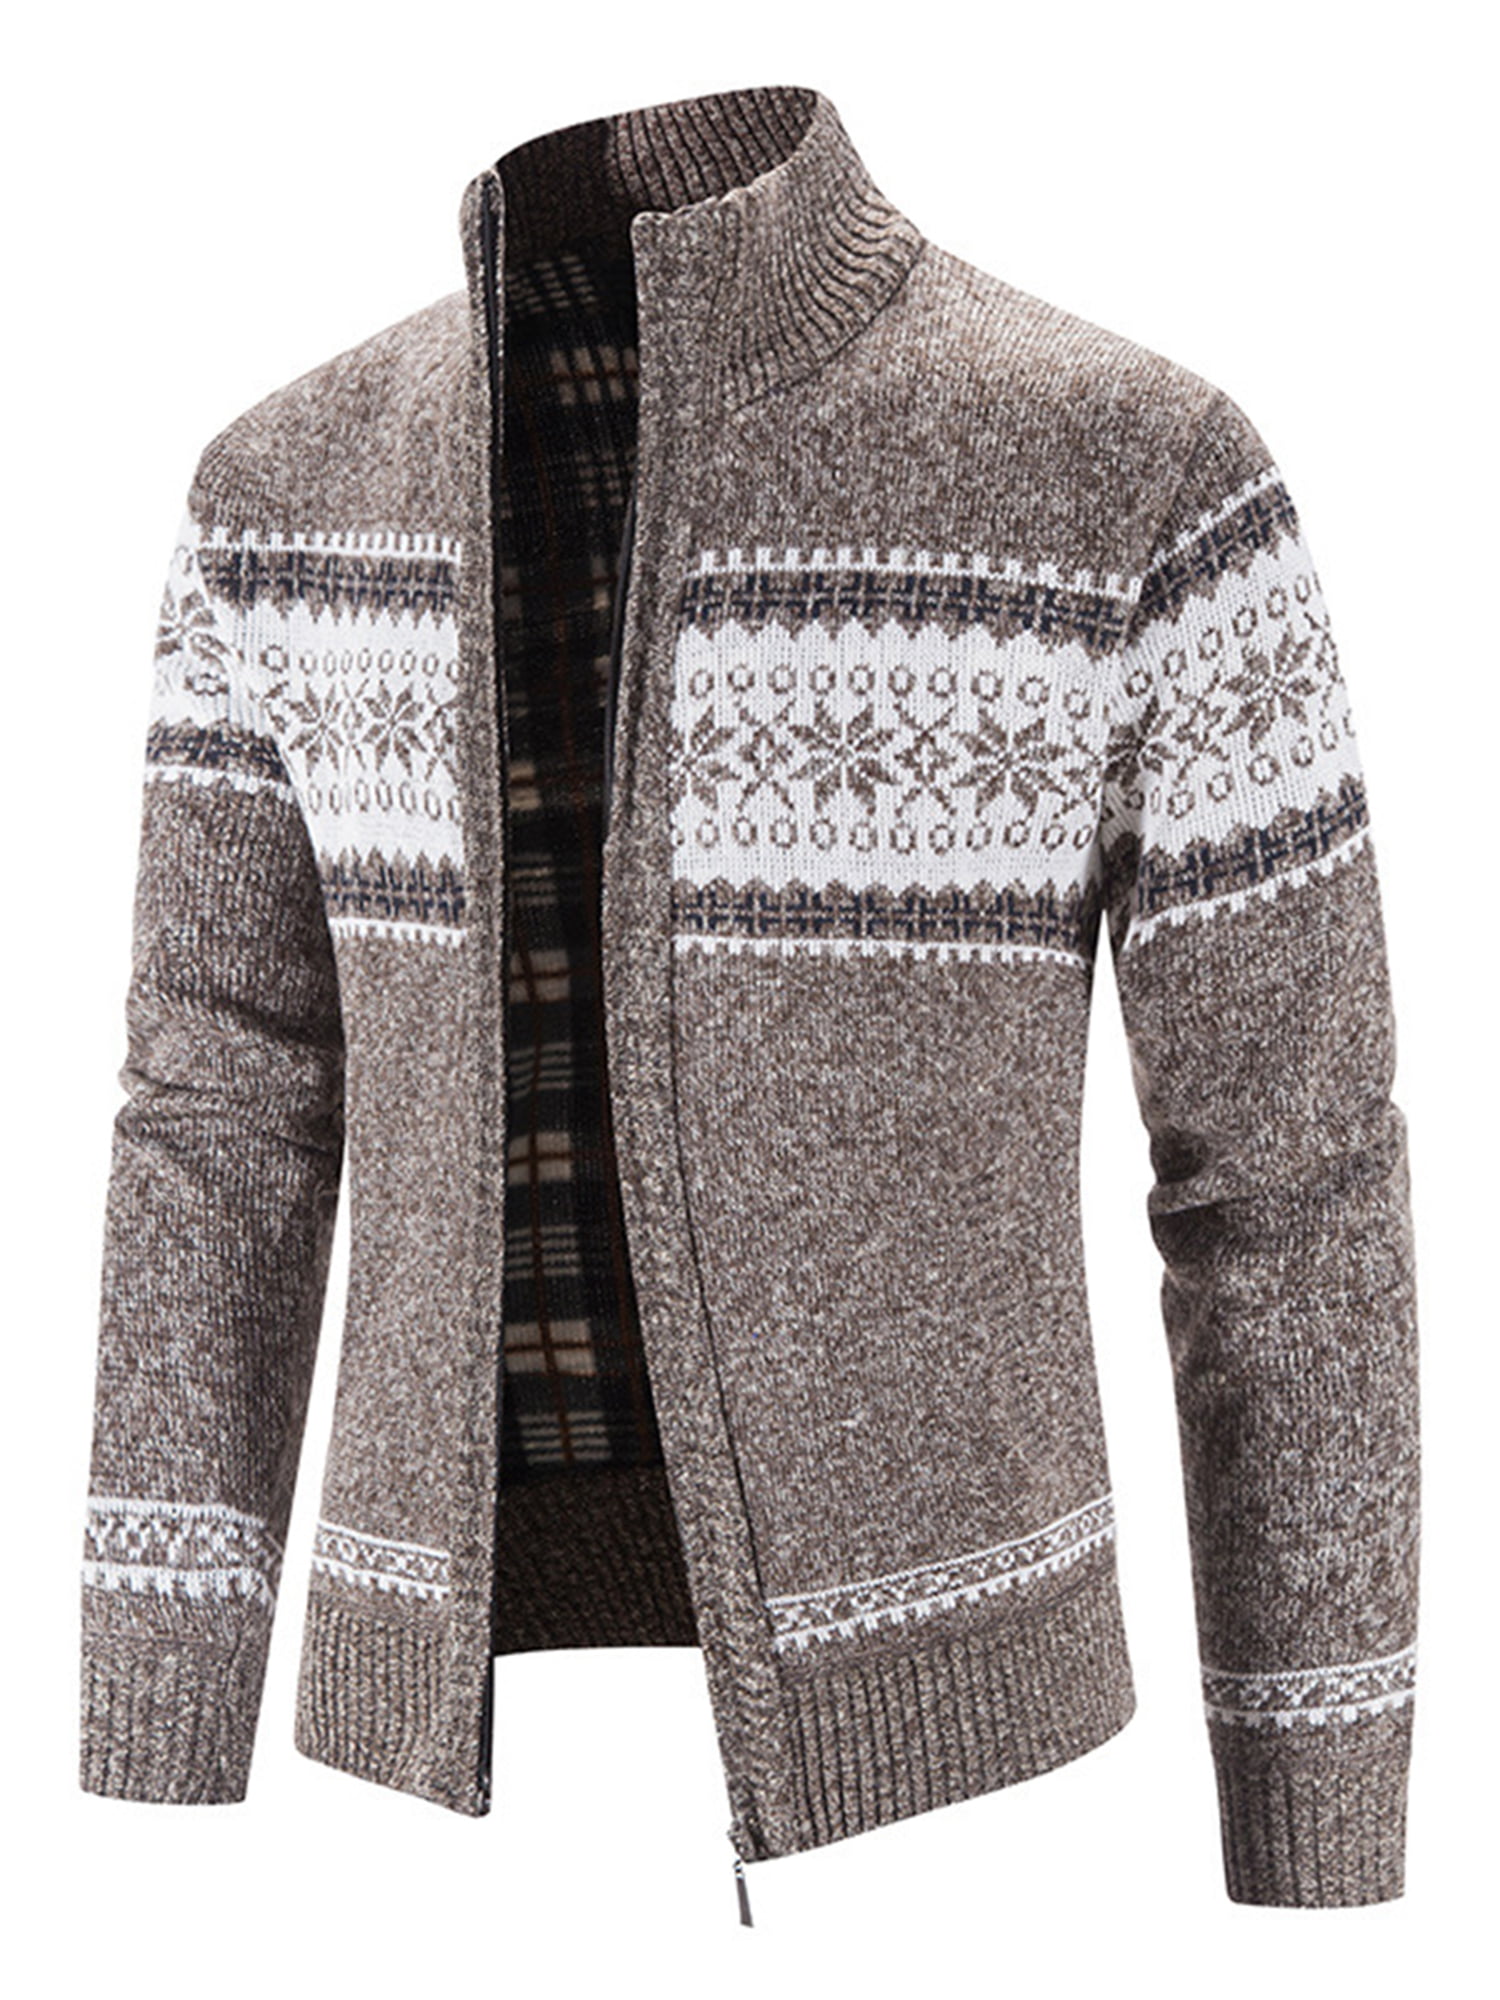 Cafuny Mens Casual Slim Christmas Snowflake Round Collar Knitted Pullover Sweater